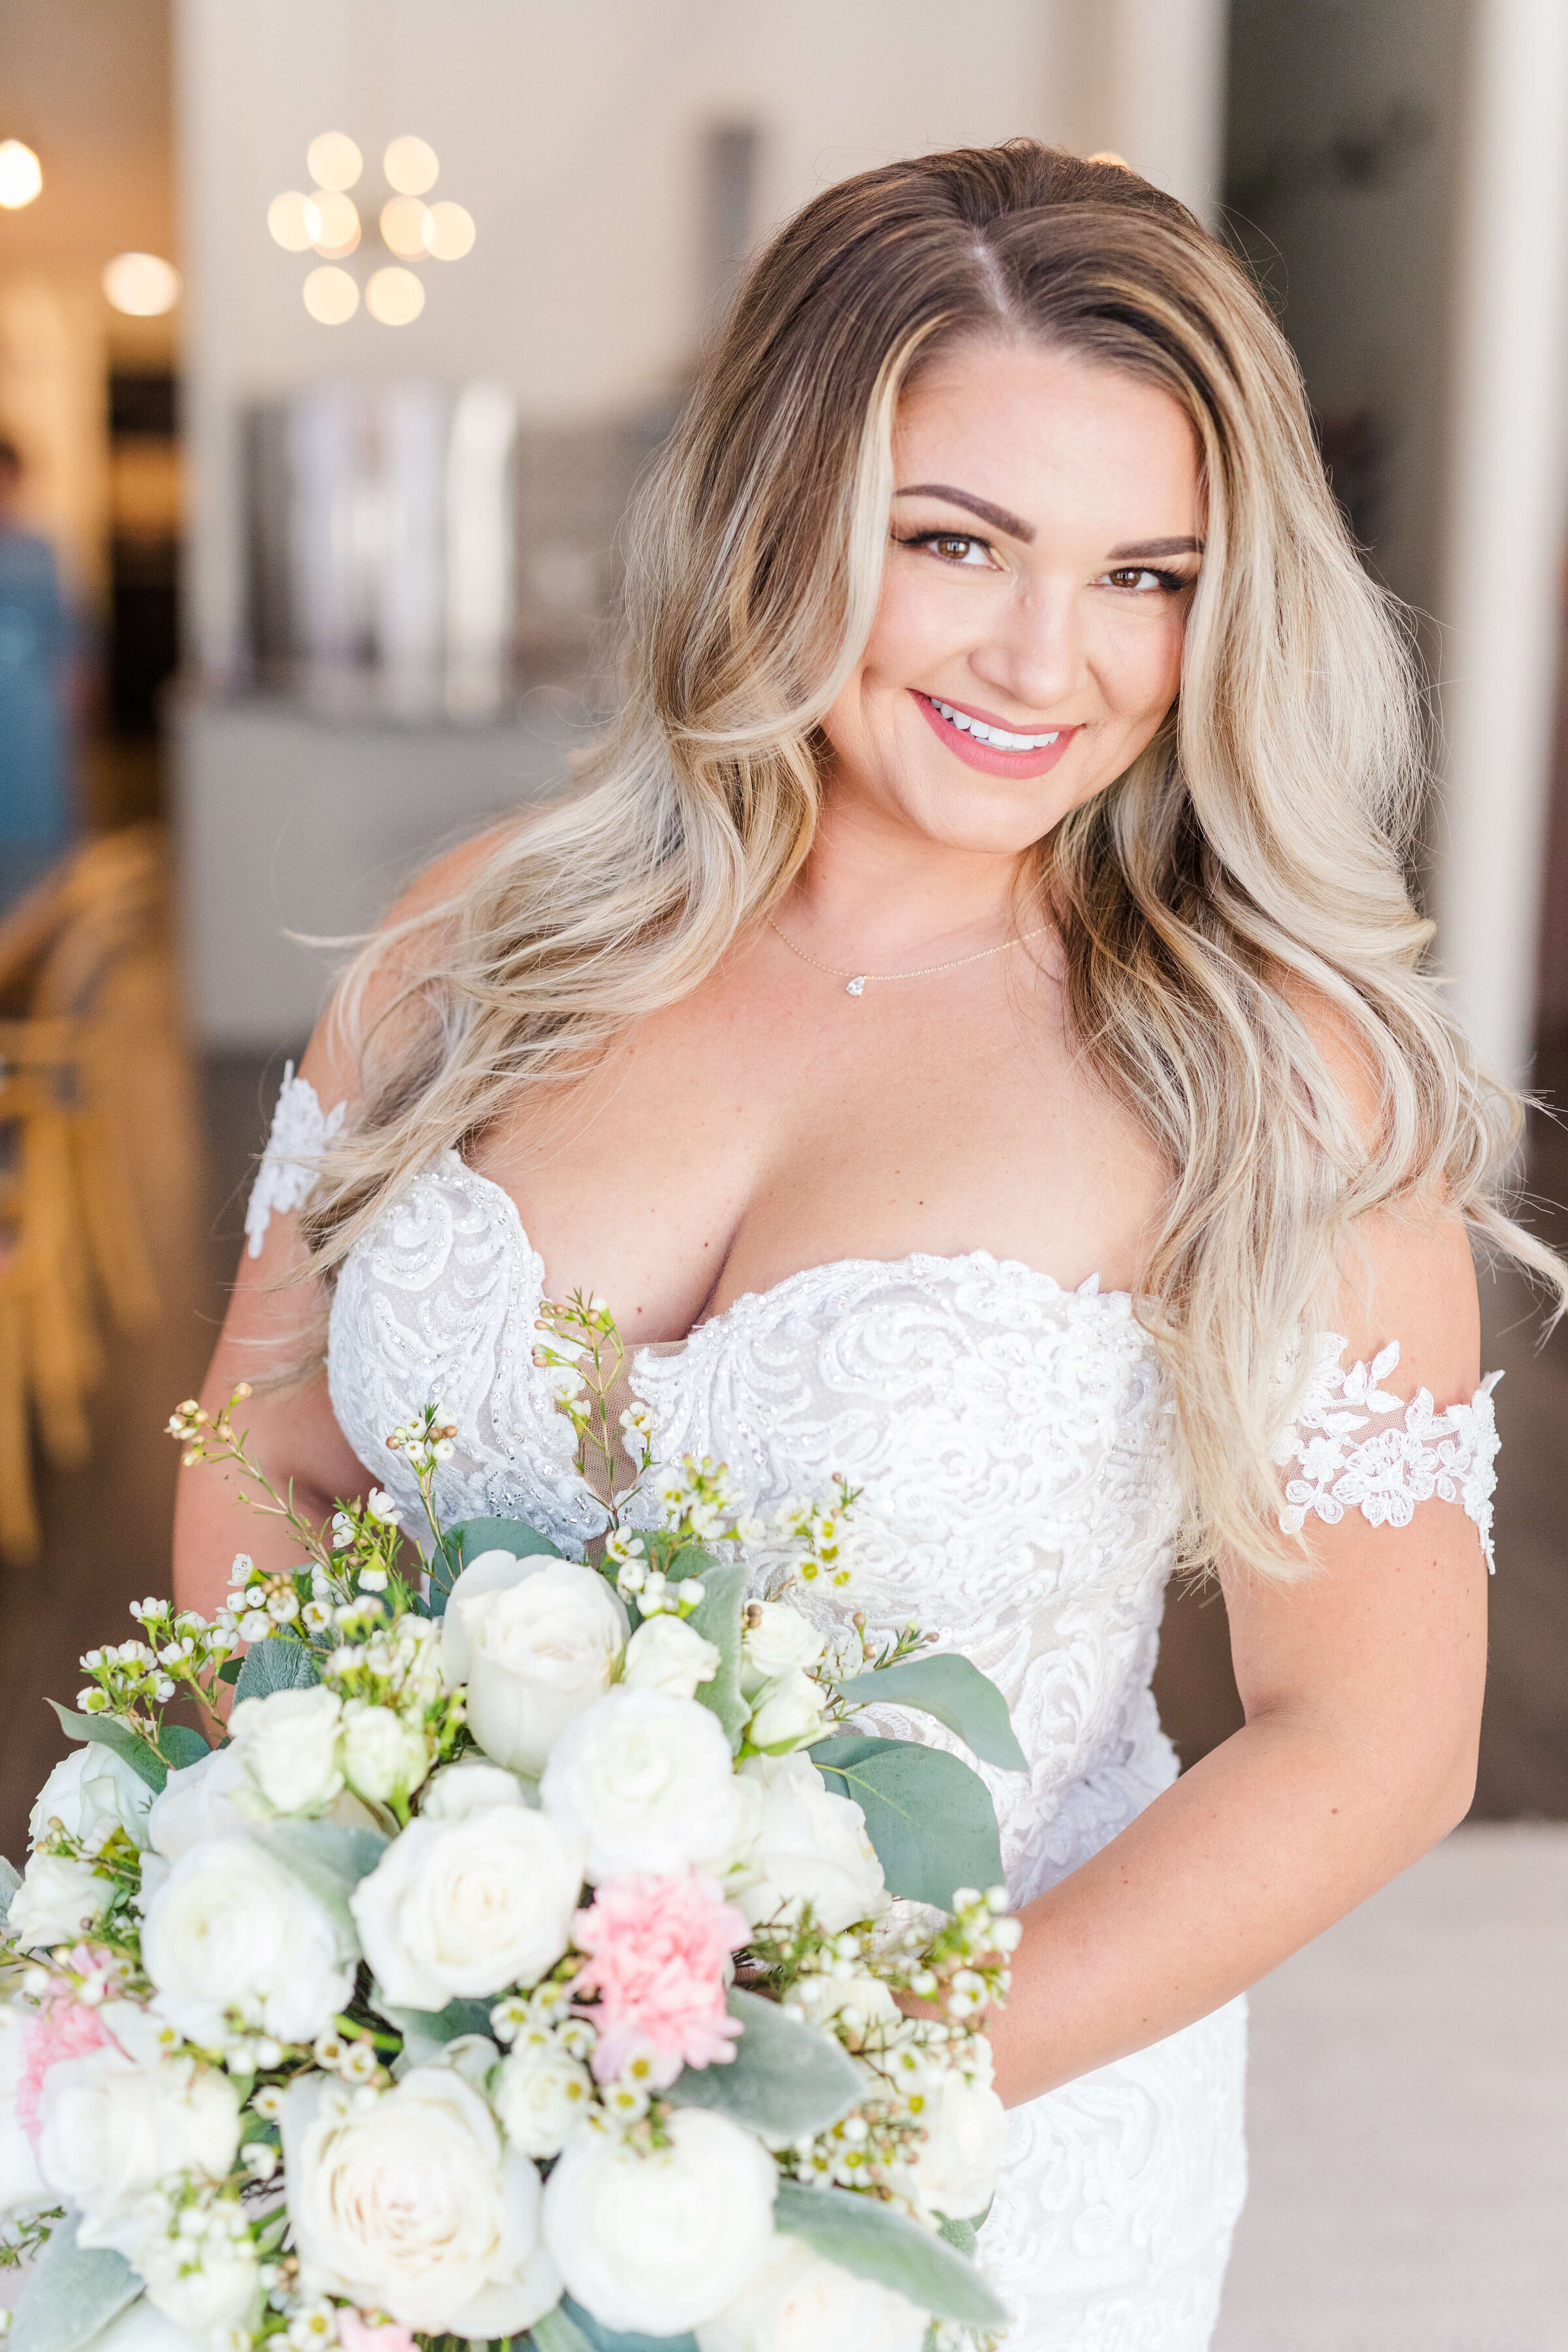 A bride holds her pink and white bouquet as she smiles at the camera.